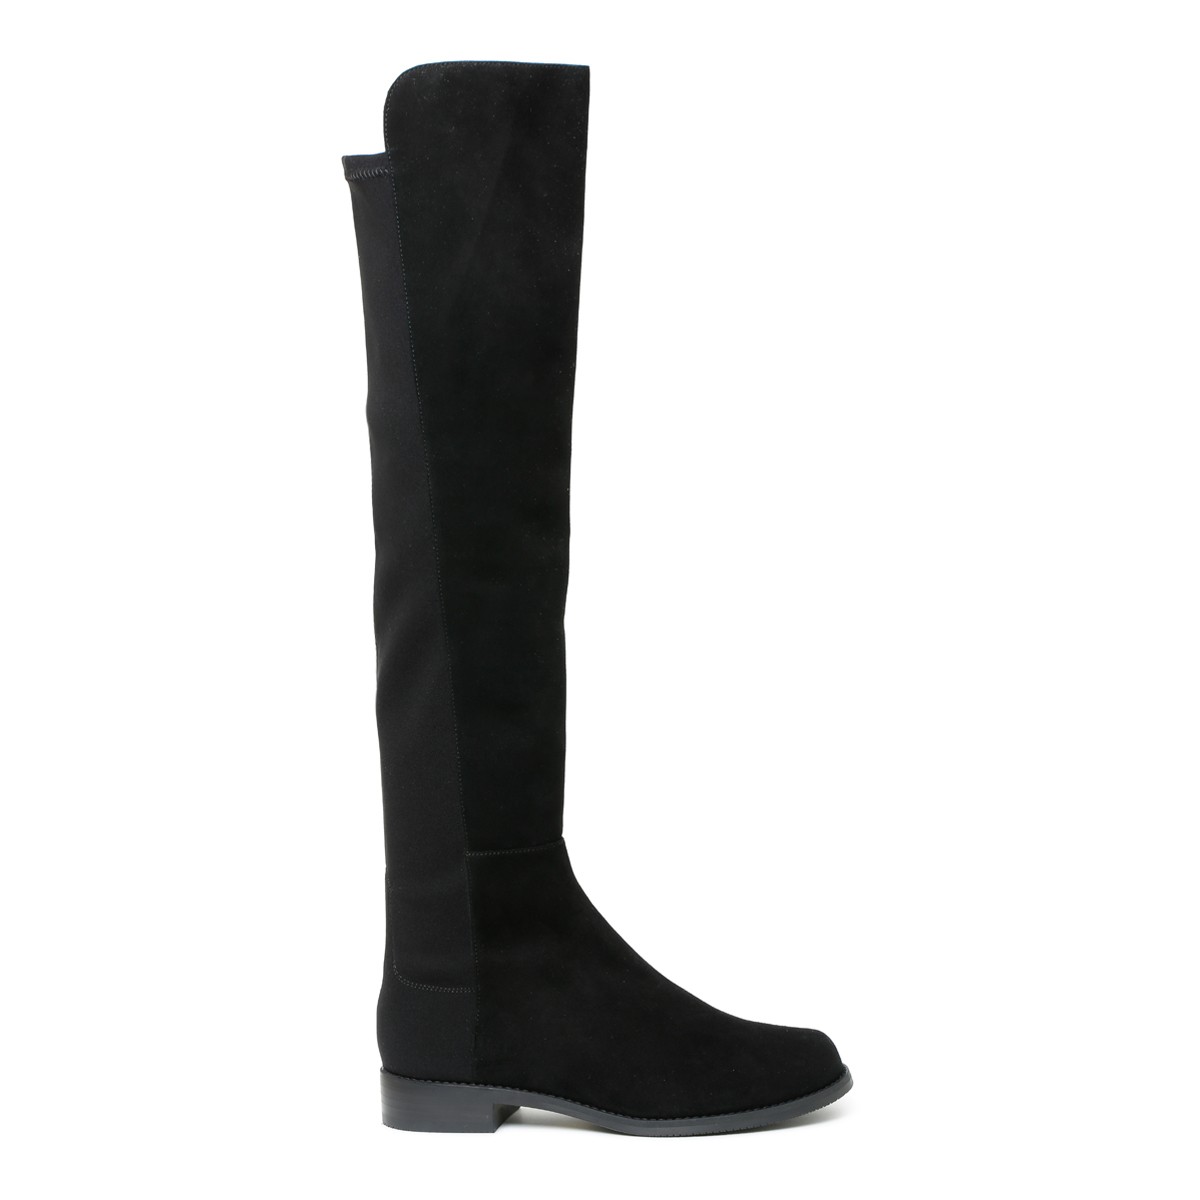 Stuart Weitzman Black Calf Leather Reserve Over The Knee Boots. 